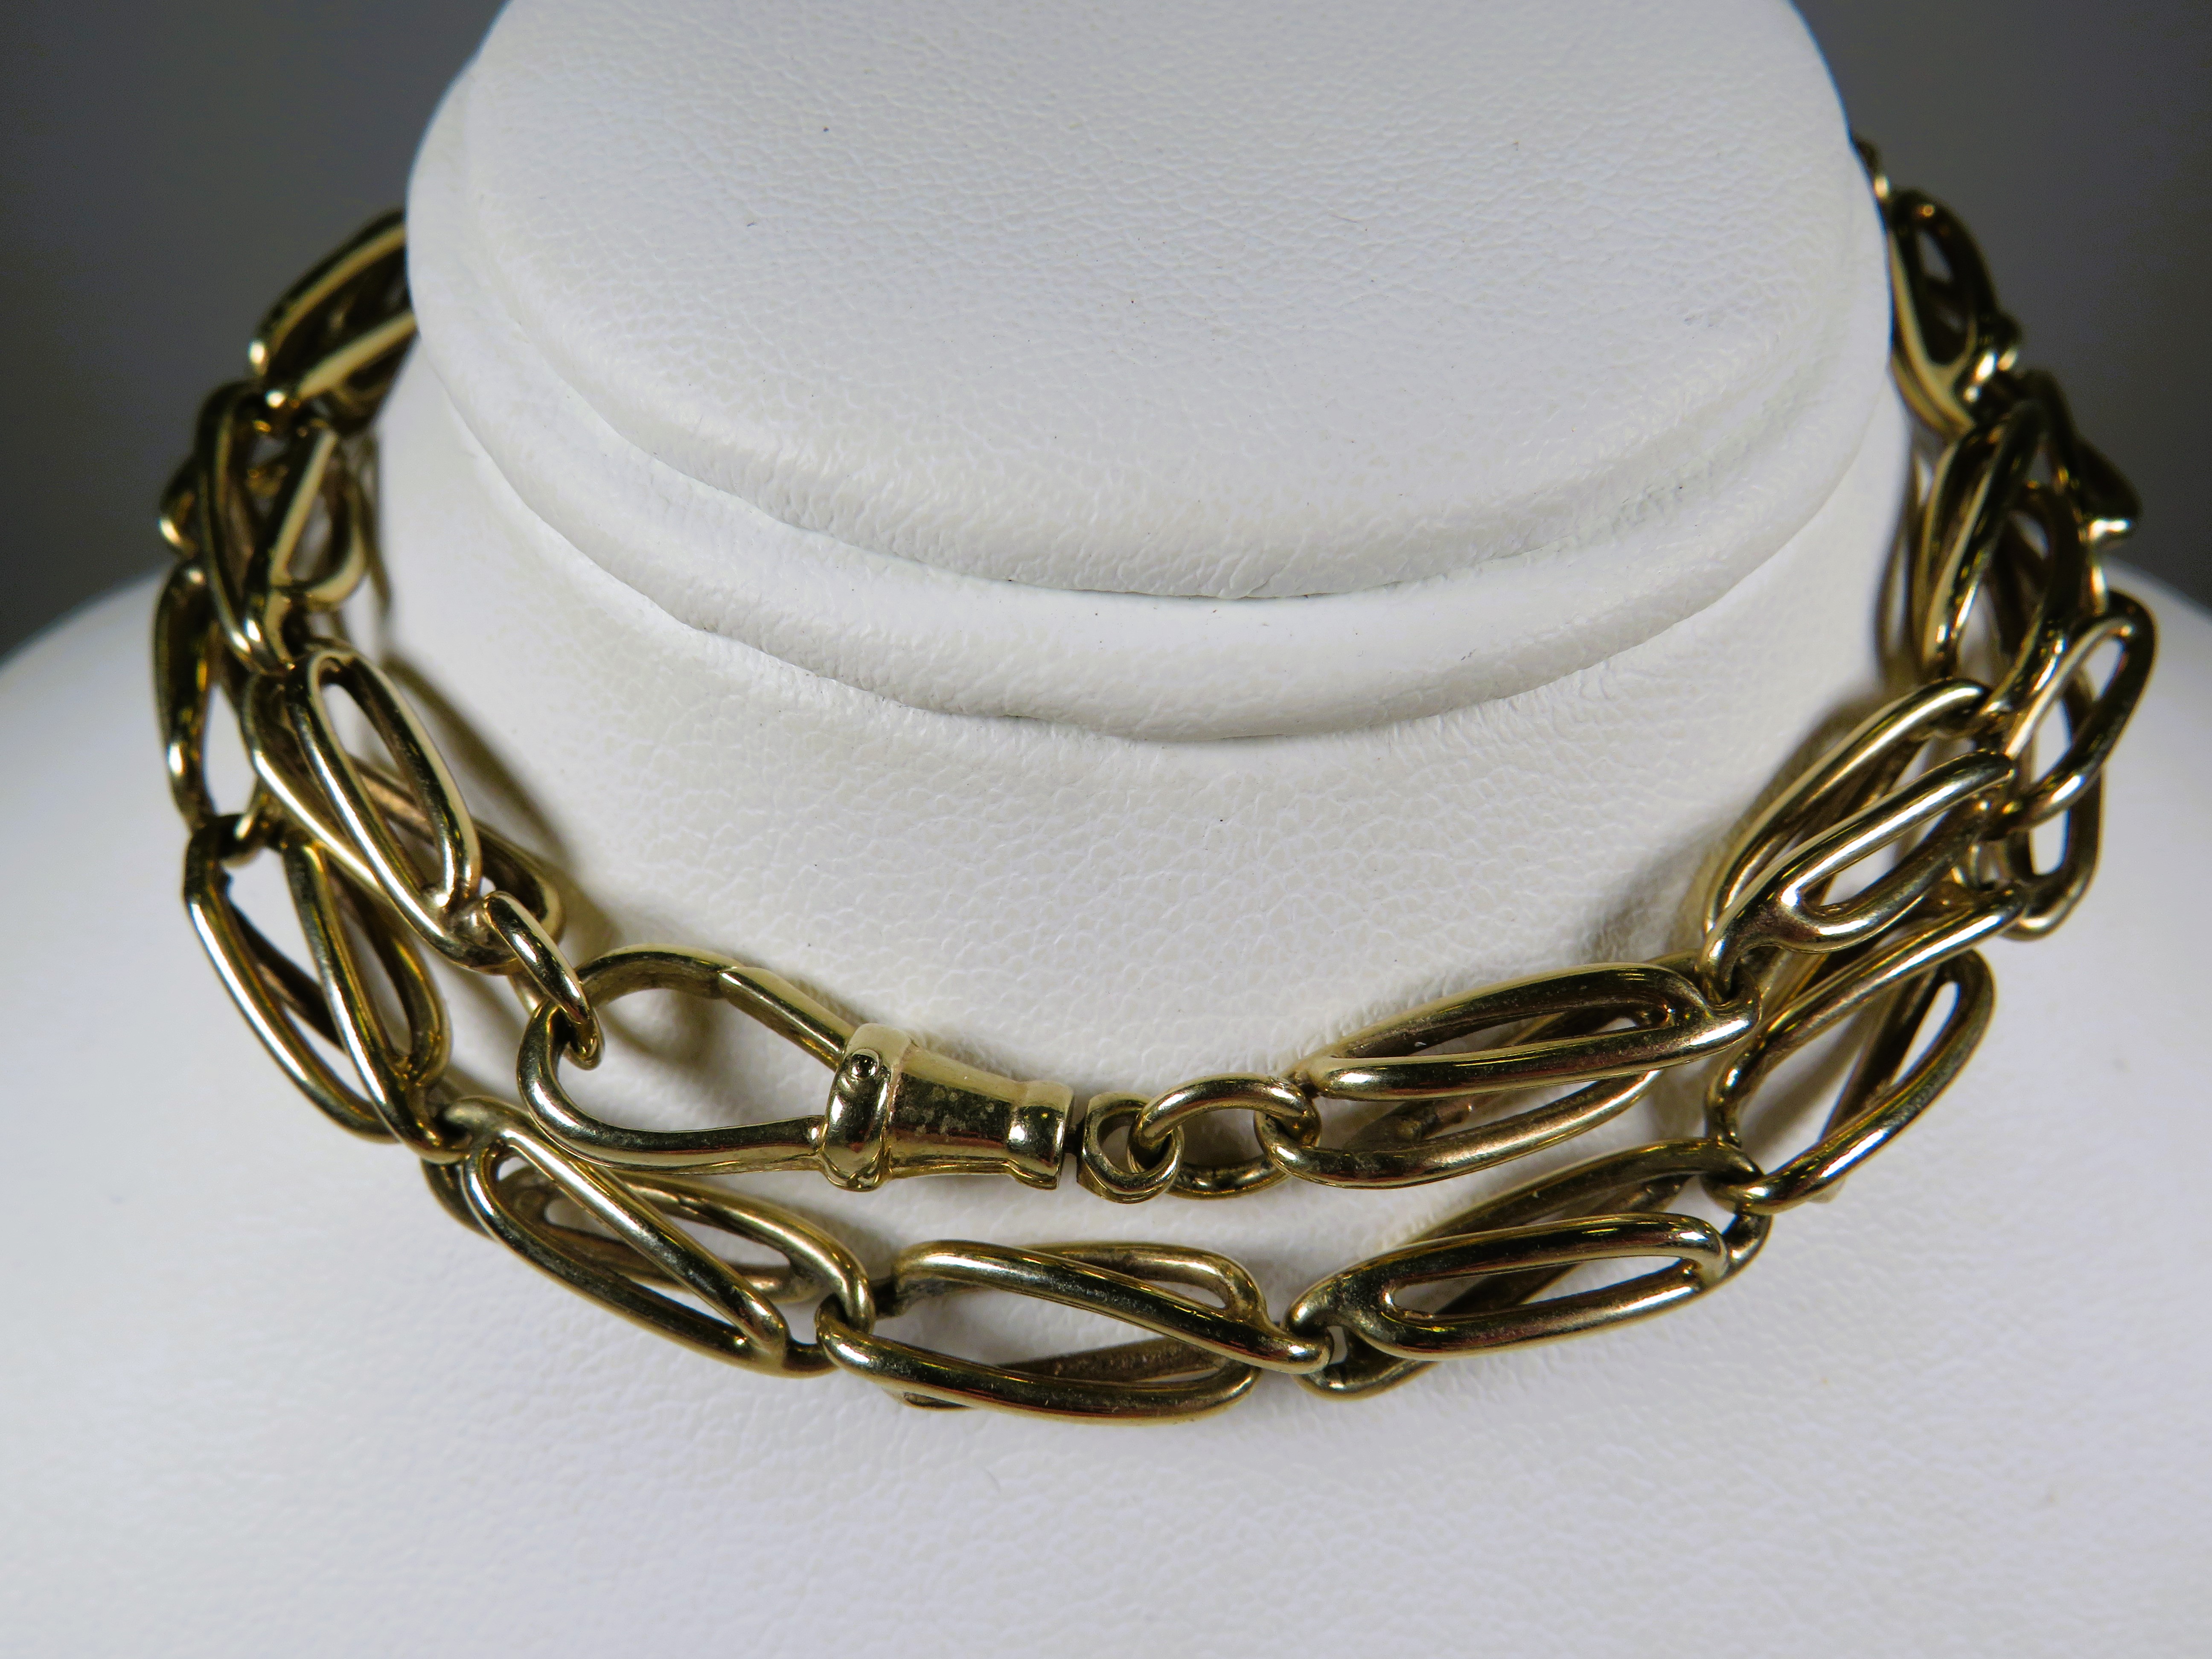 9ct Yellow Gold Chain made from Elongated Links. Measuring 18 inches long and weighs    31.2g